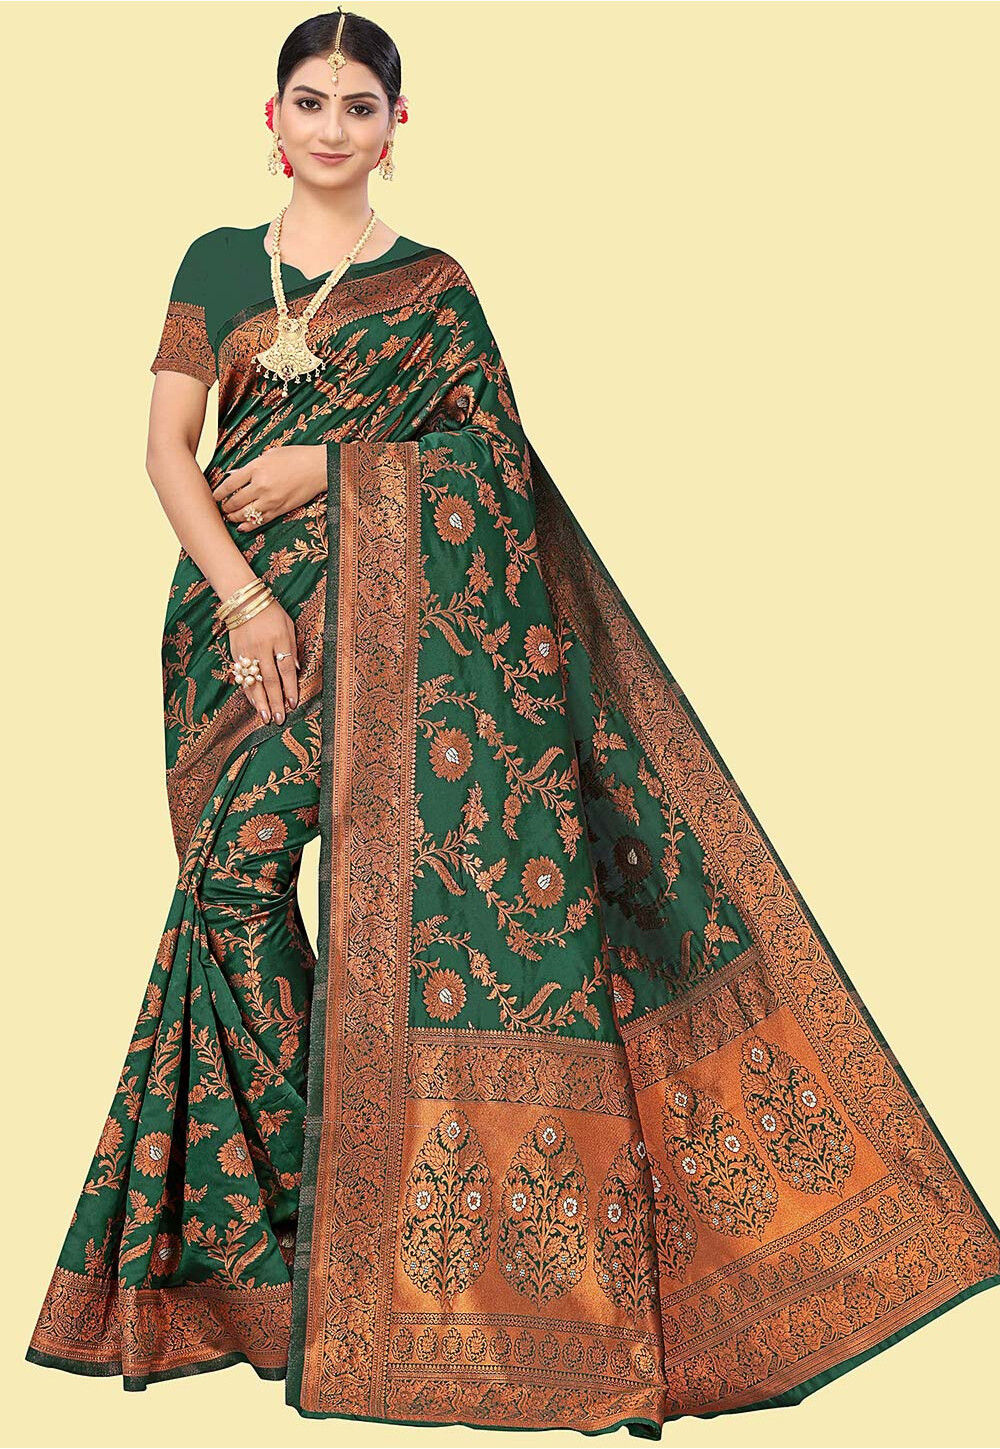 Solid Color Satin Silk Saree in Teal Green